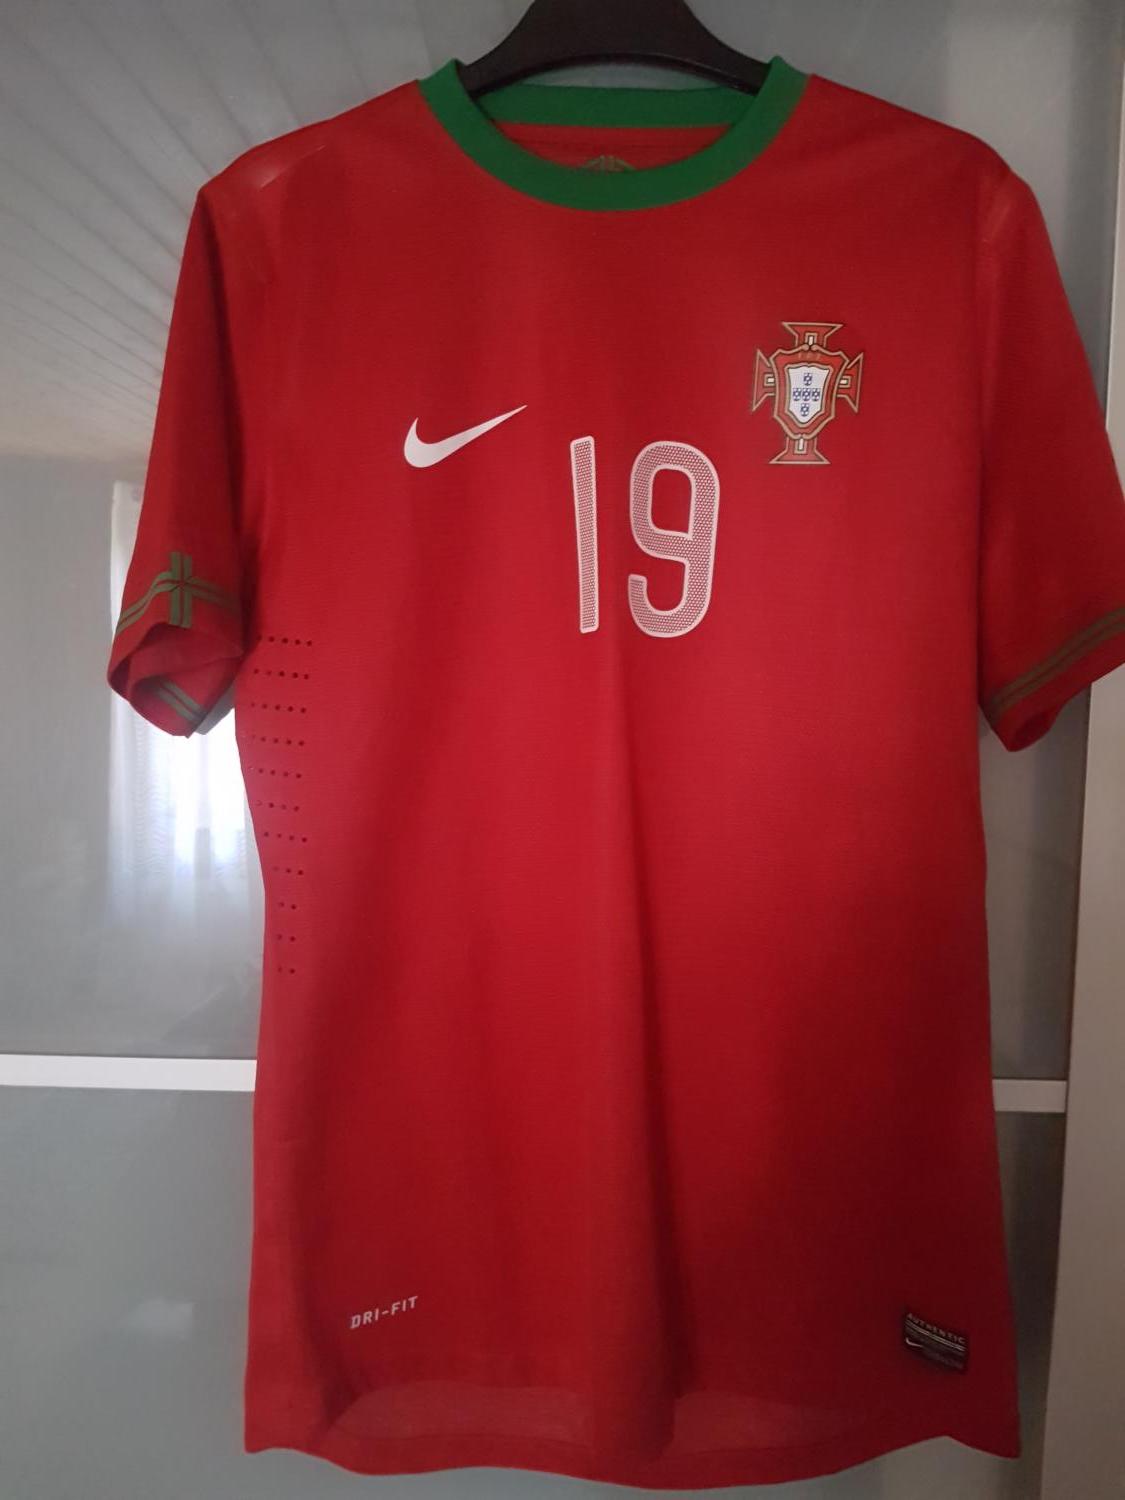 Matchdetail 2012 für Trikot Portugal  for shirt jersey Portugal 